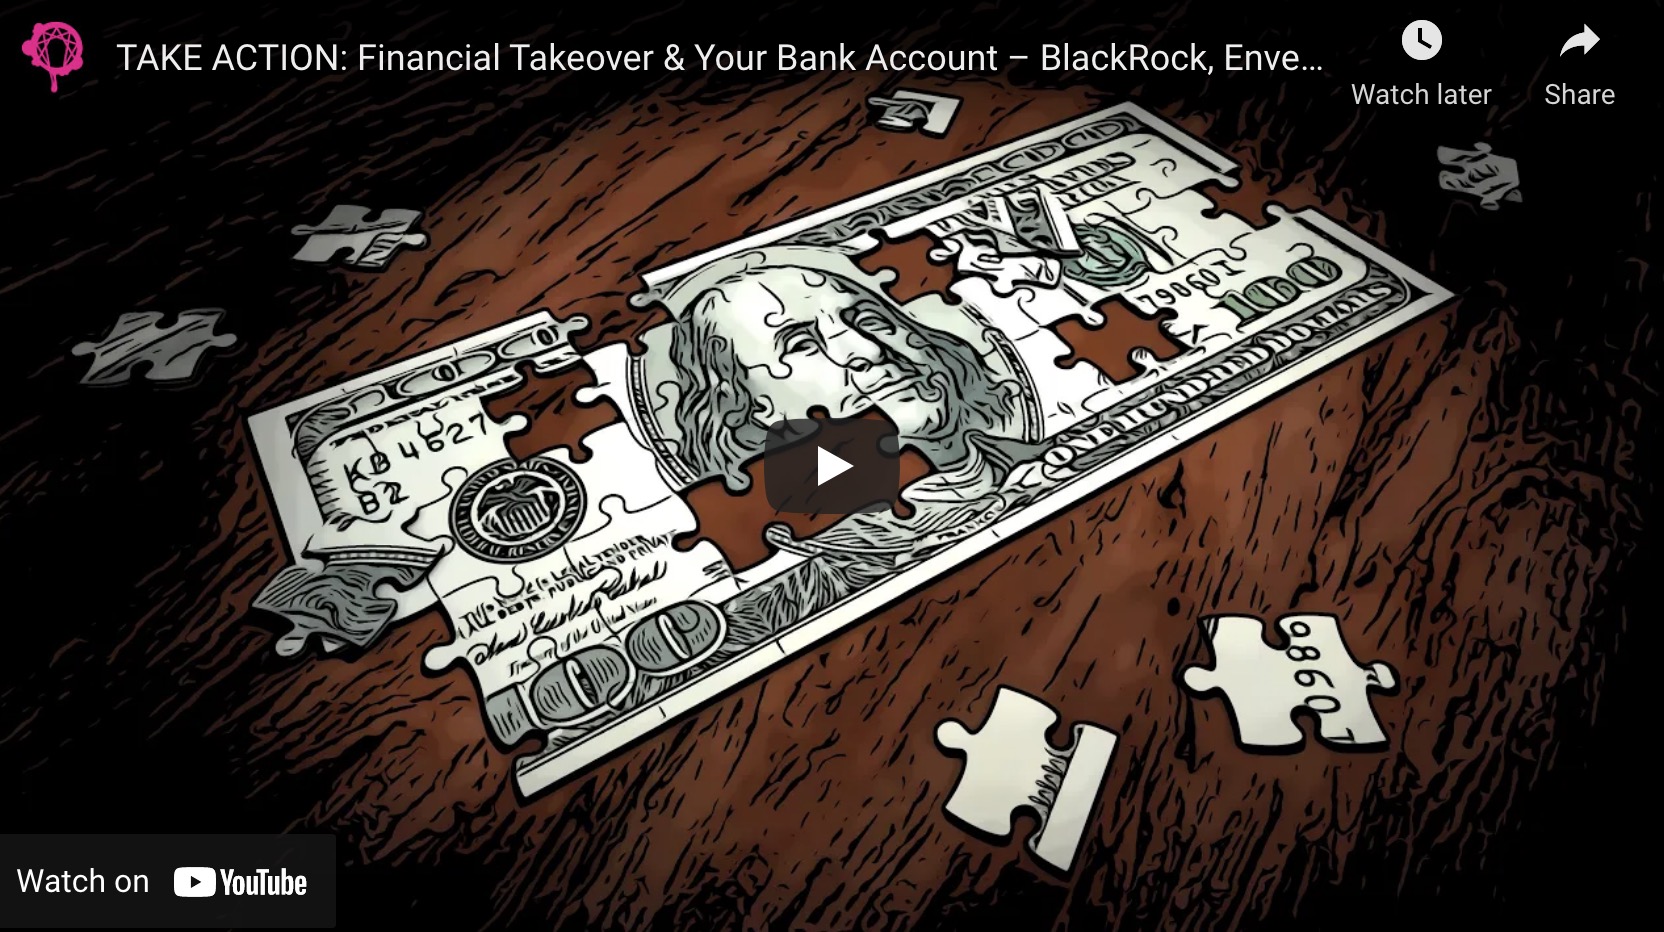  VIDEO: Financial Takeover and Your Bank Account – BlackRock, Envestnet/Yodlee, and The Federal Reserve